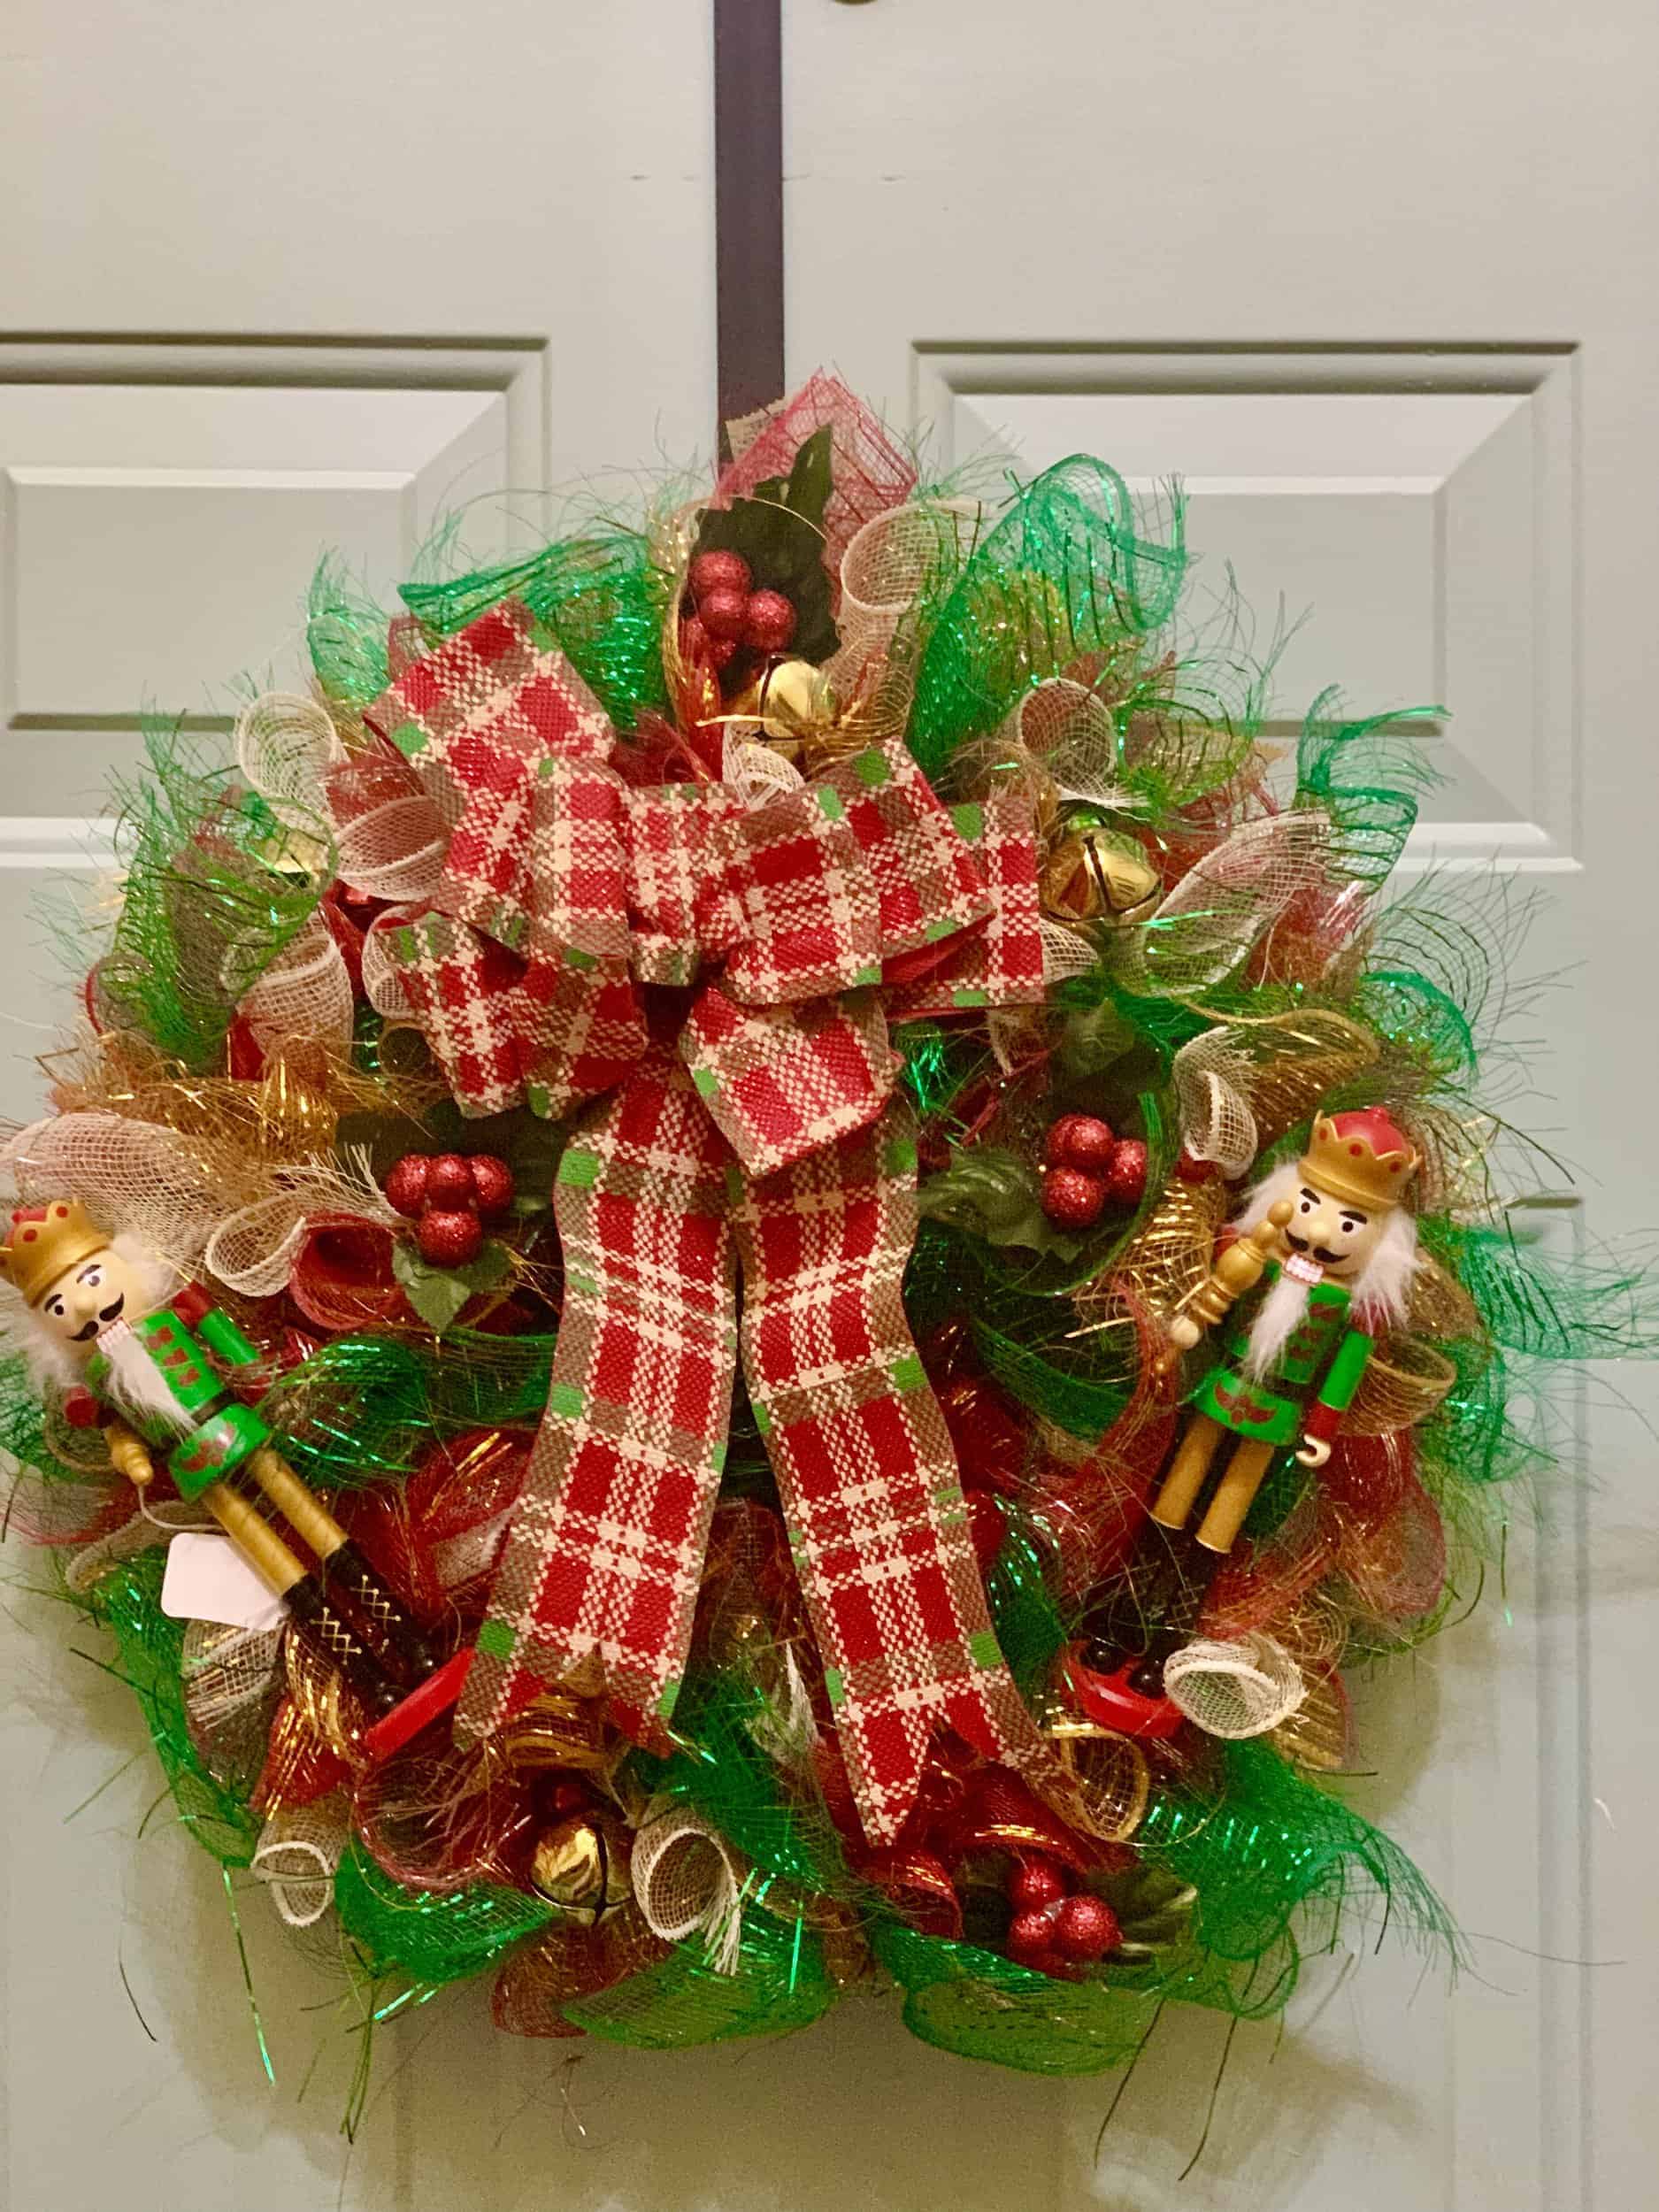 This Nutcracker Wreath is made with love by Willow Chic Designs! Shop more unique gift ideas today with Spots Initiatives, the best way to support creators.